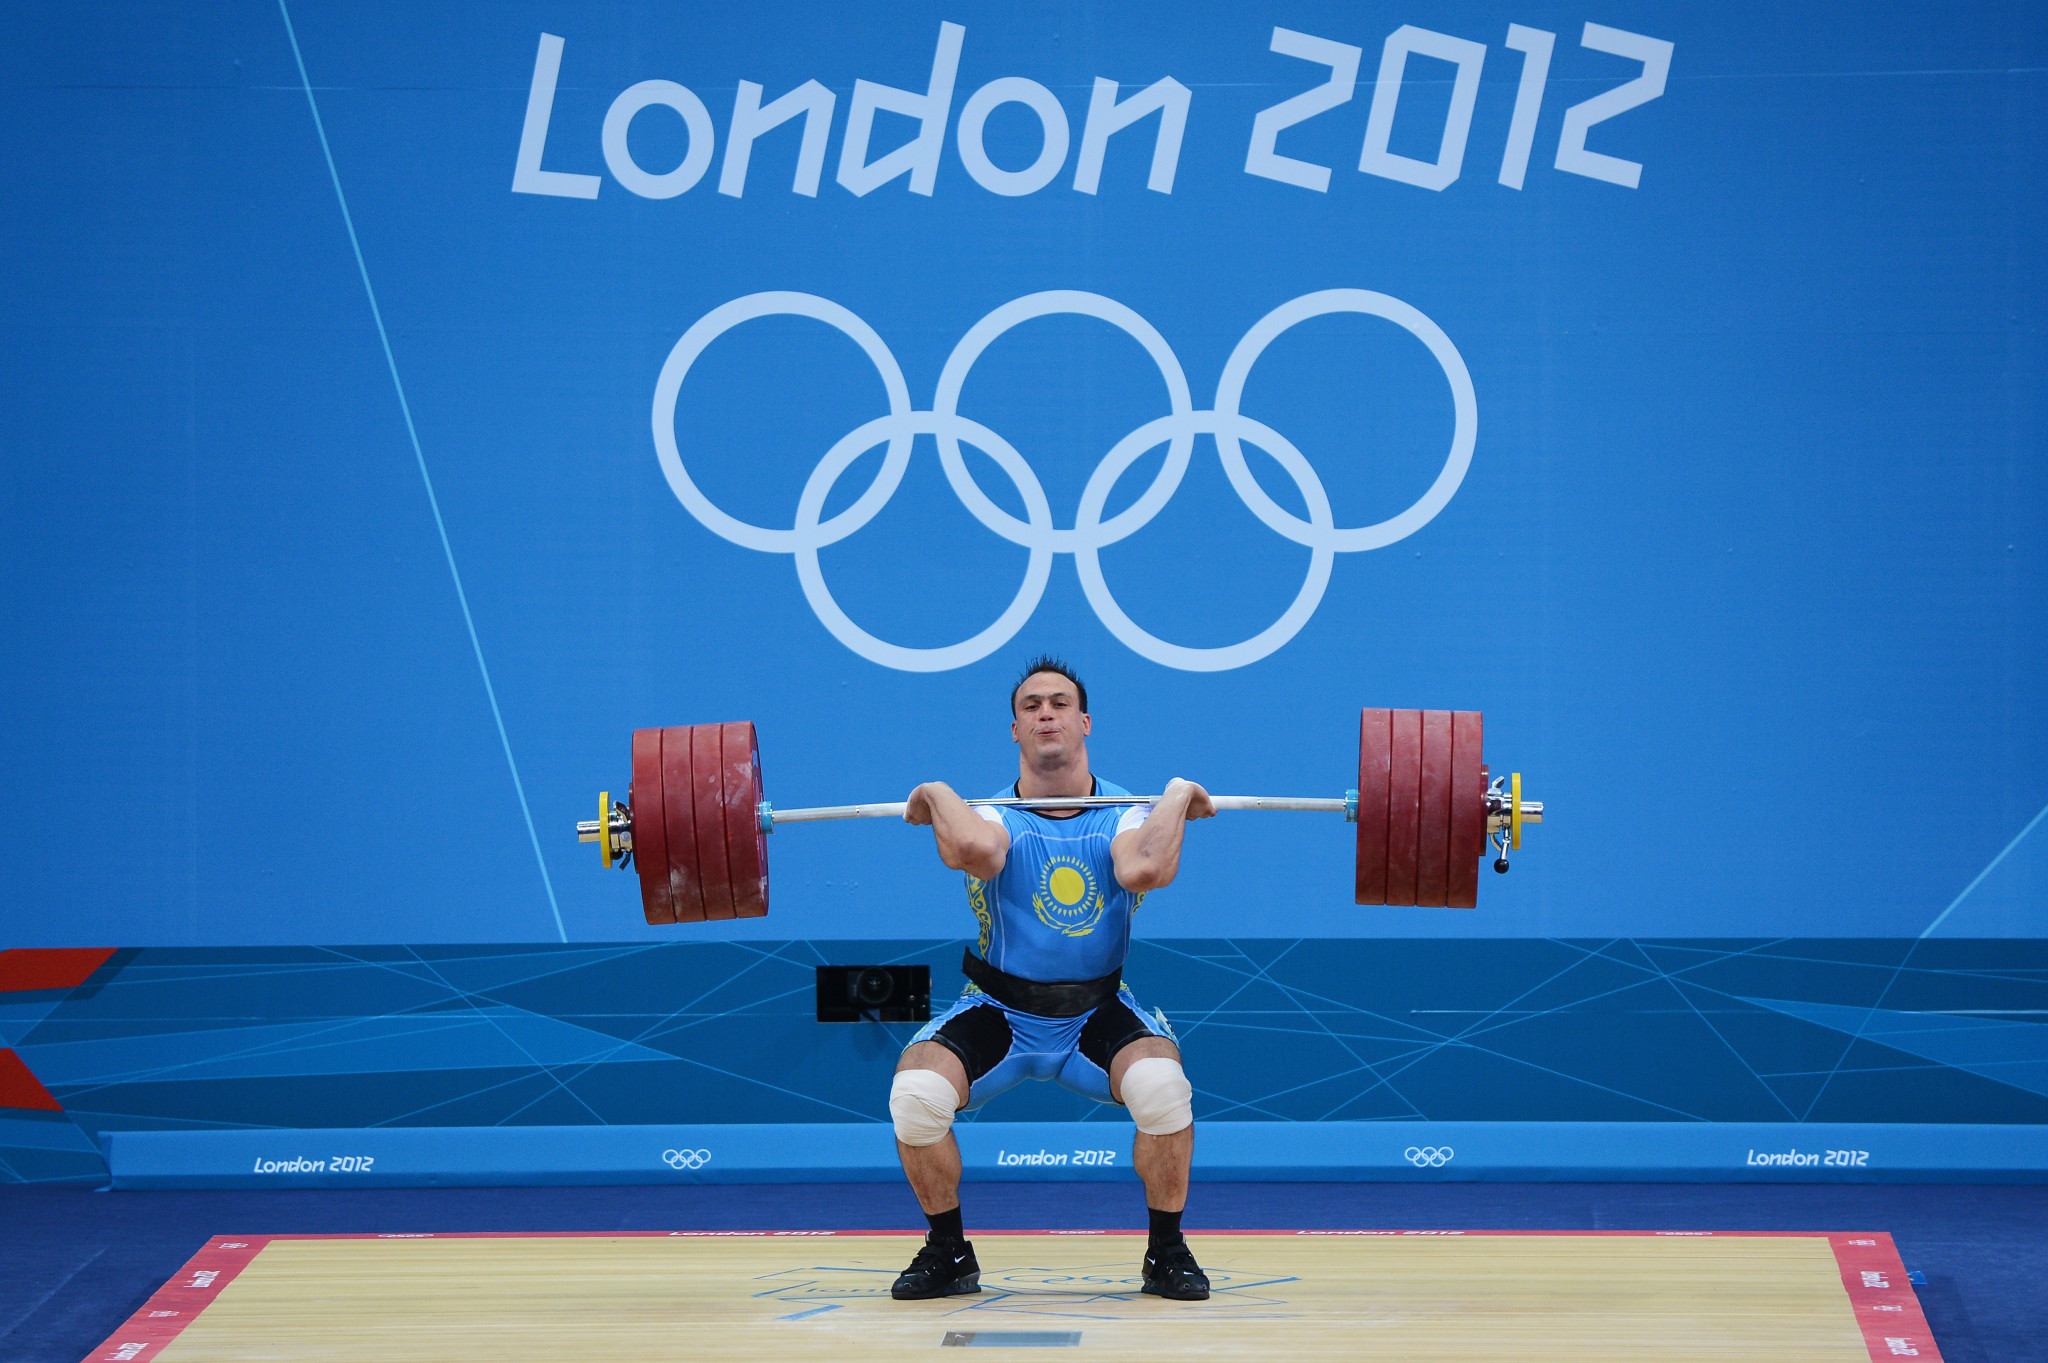 Ilya Ilyin - seen as a national hero in Kazakhstan, despite having to return his Olympic gold medals ©Getty Images